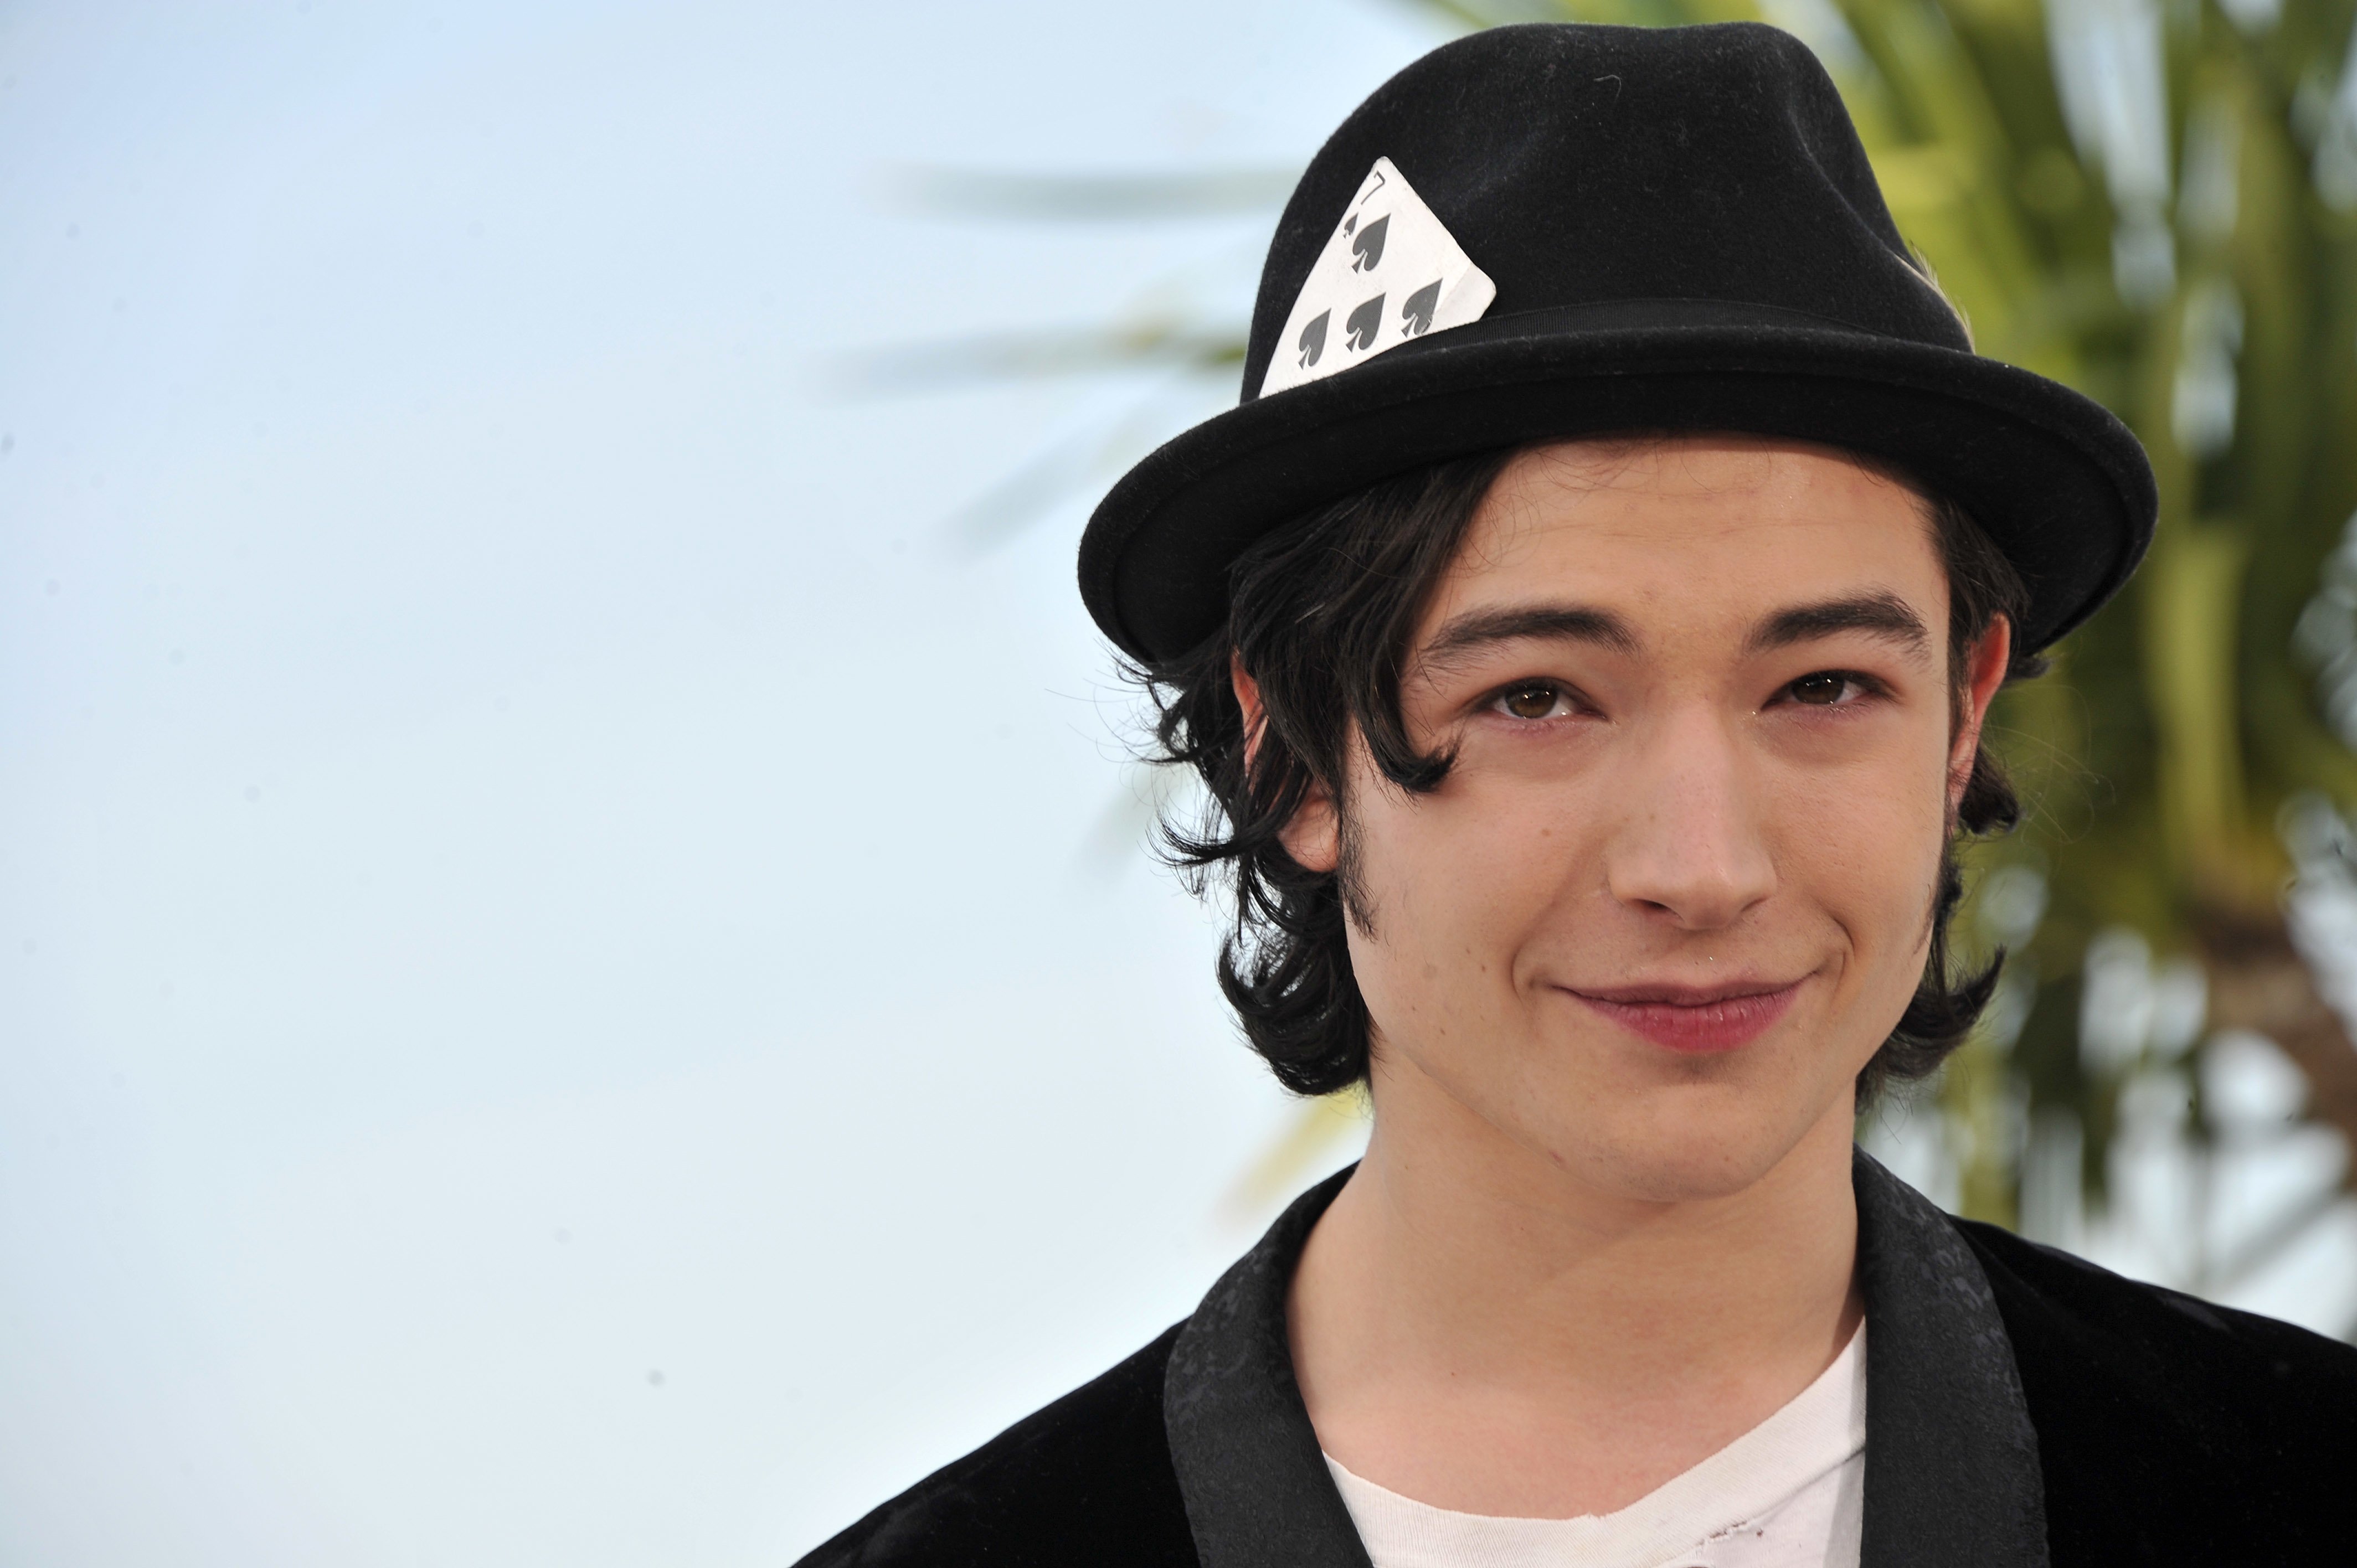 Ezra Miller at the 64th Cannes International Film Festival for a photo call for "We need to talk about Kevin" on May 12, 2011 | Source: Getty Images